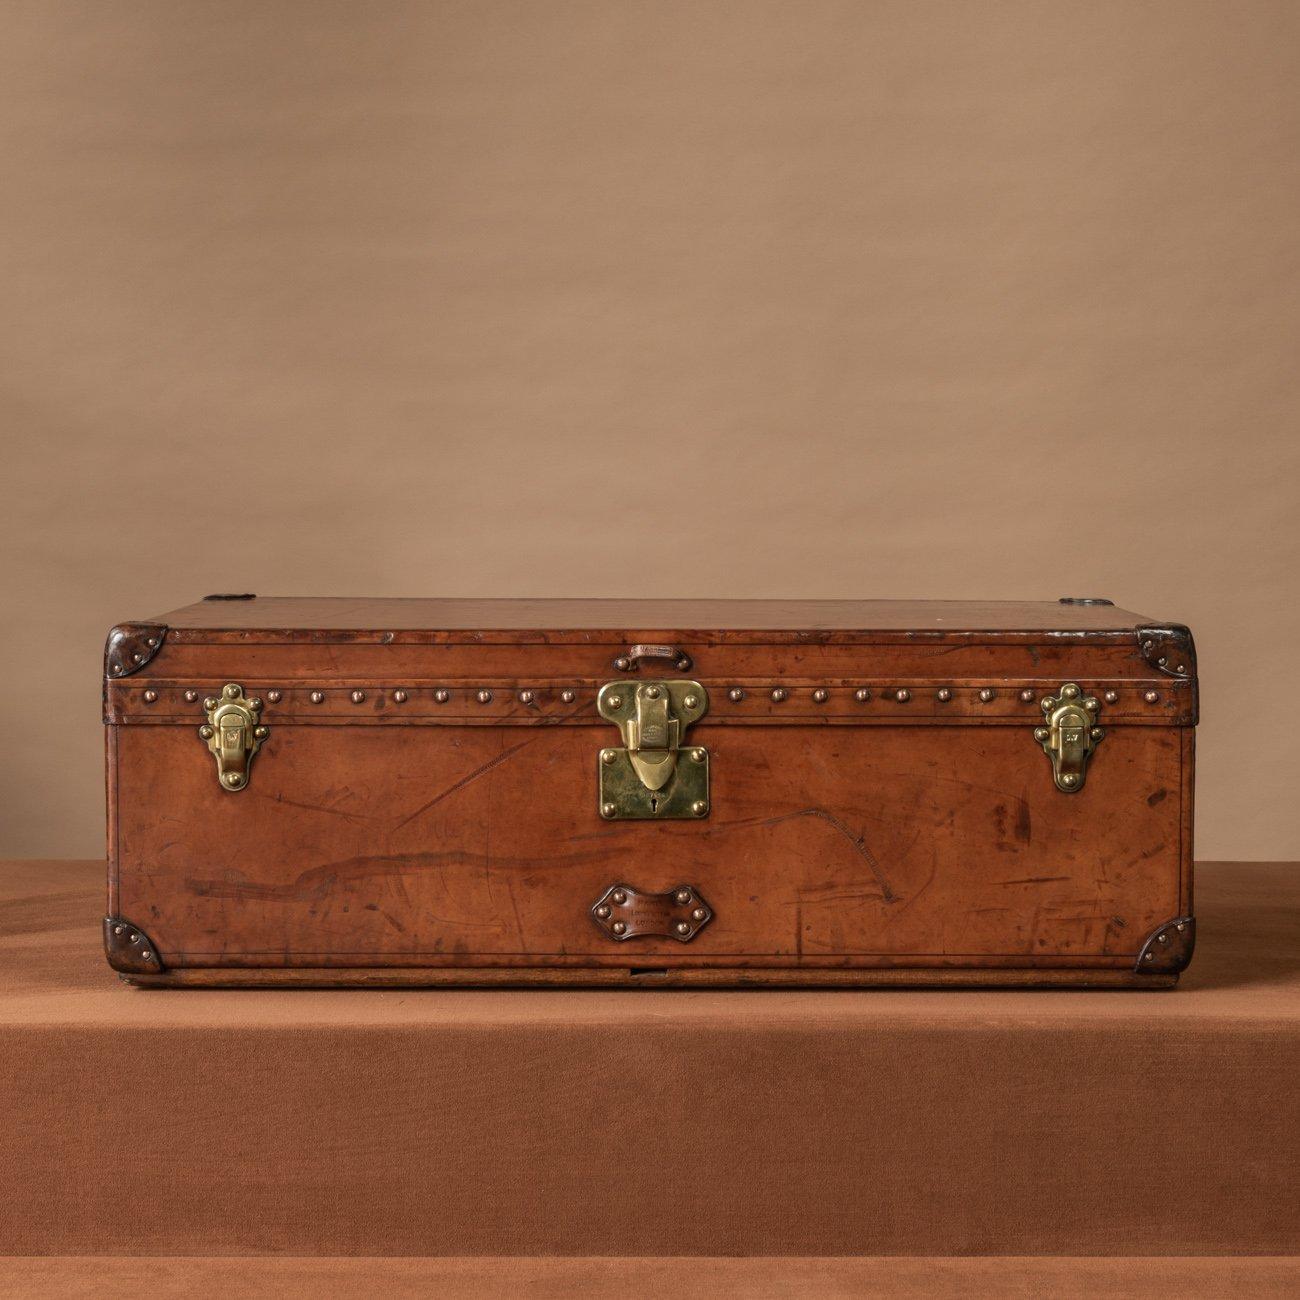 A well proportioned natural leather covered Louis Vuitton cabin trunk that has built up a rich colour and attractive patina with age. Has original leather handles & brass fittings and has its original interior in-tact (including the original tray);